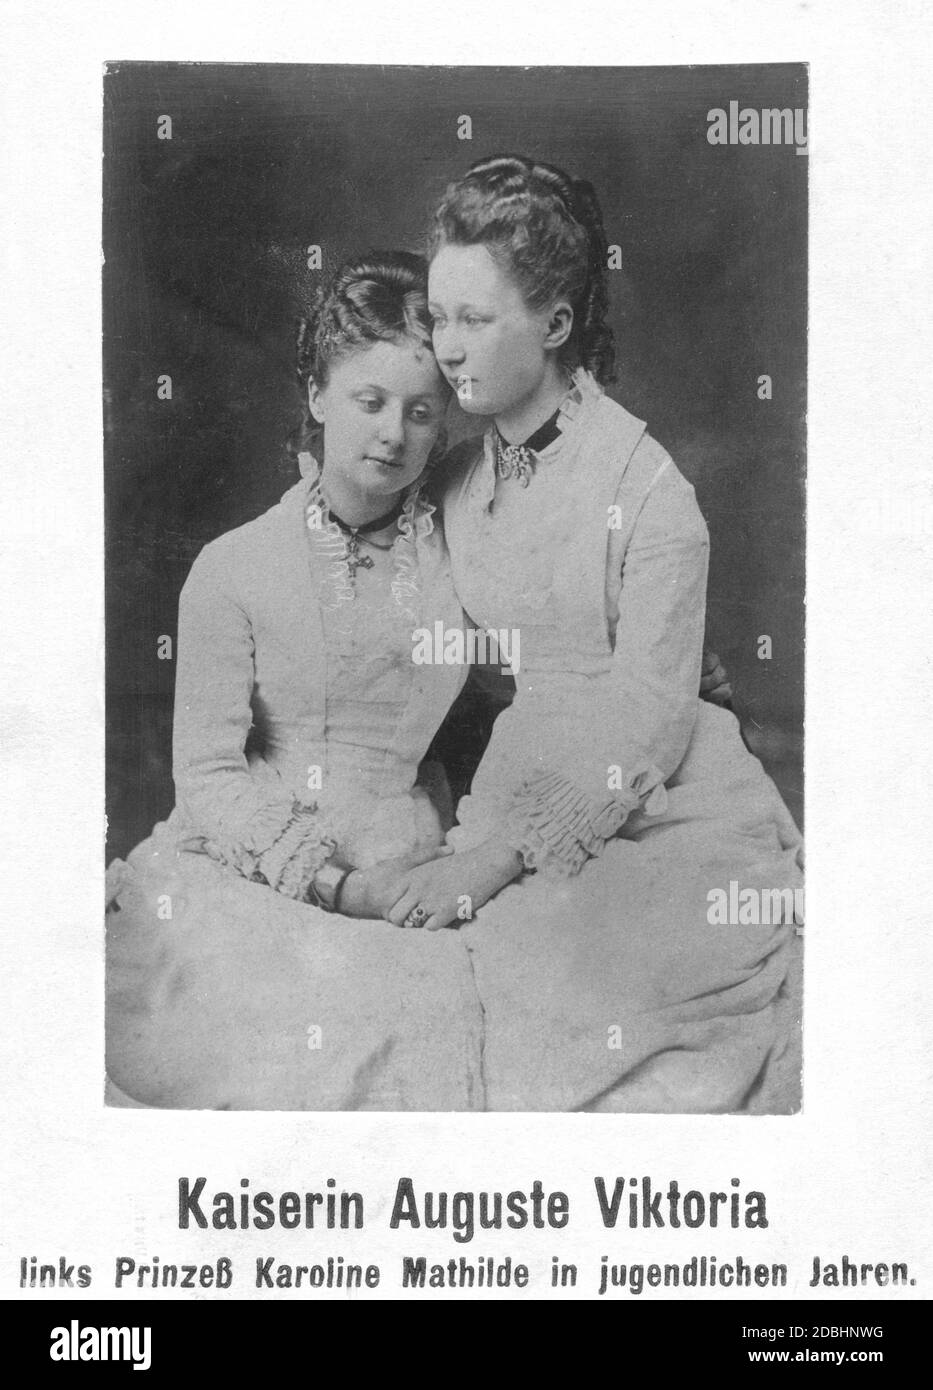 The portrait shows the sisters and princesses Caroline Mathilde (left) and Augusta Victoria of Schleswig-Holstein-Sonderburg-Augustenburg (right, later Empress of Germany). Undated photo, taken around 1875. Stock Photo